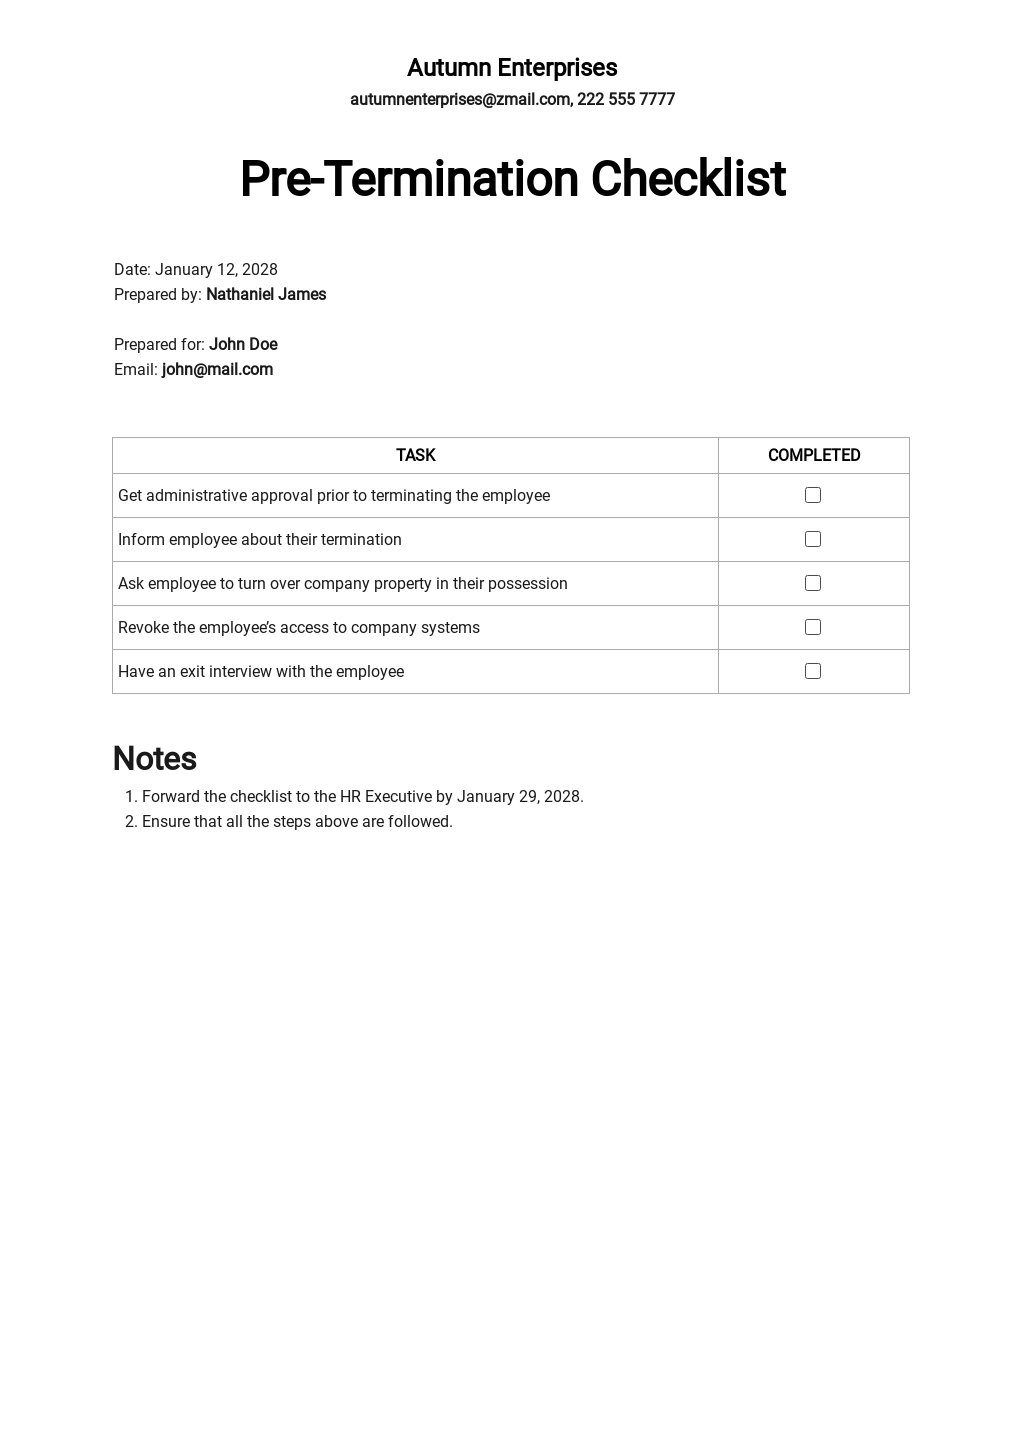 Sample Termination Checklist Template in Google Docs, Word, Apple Pages